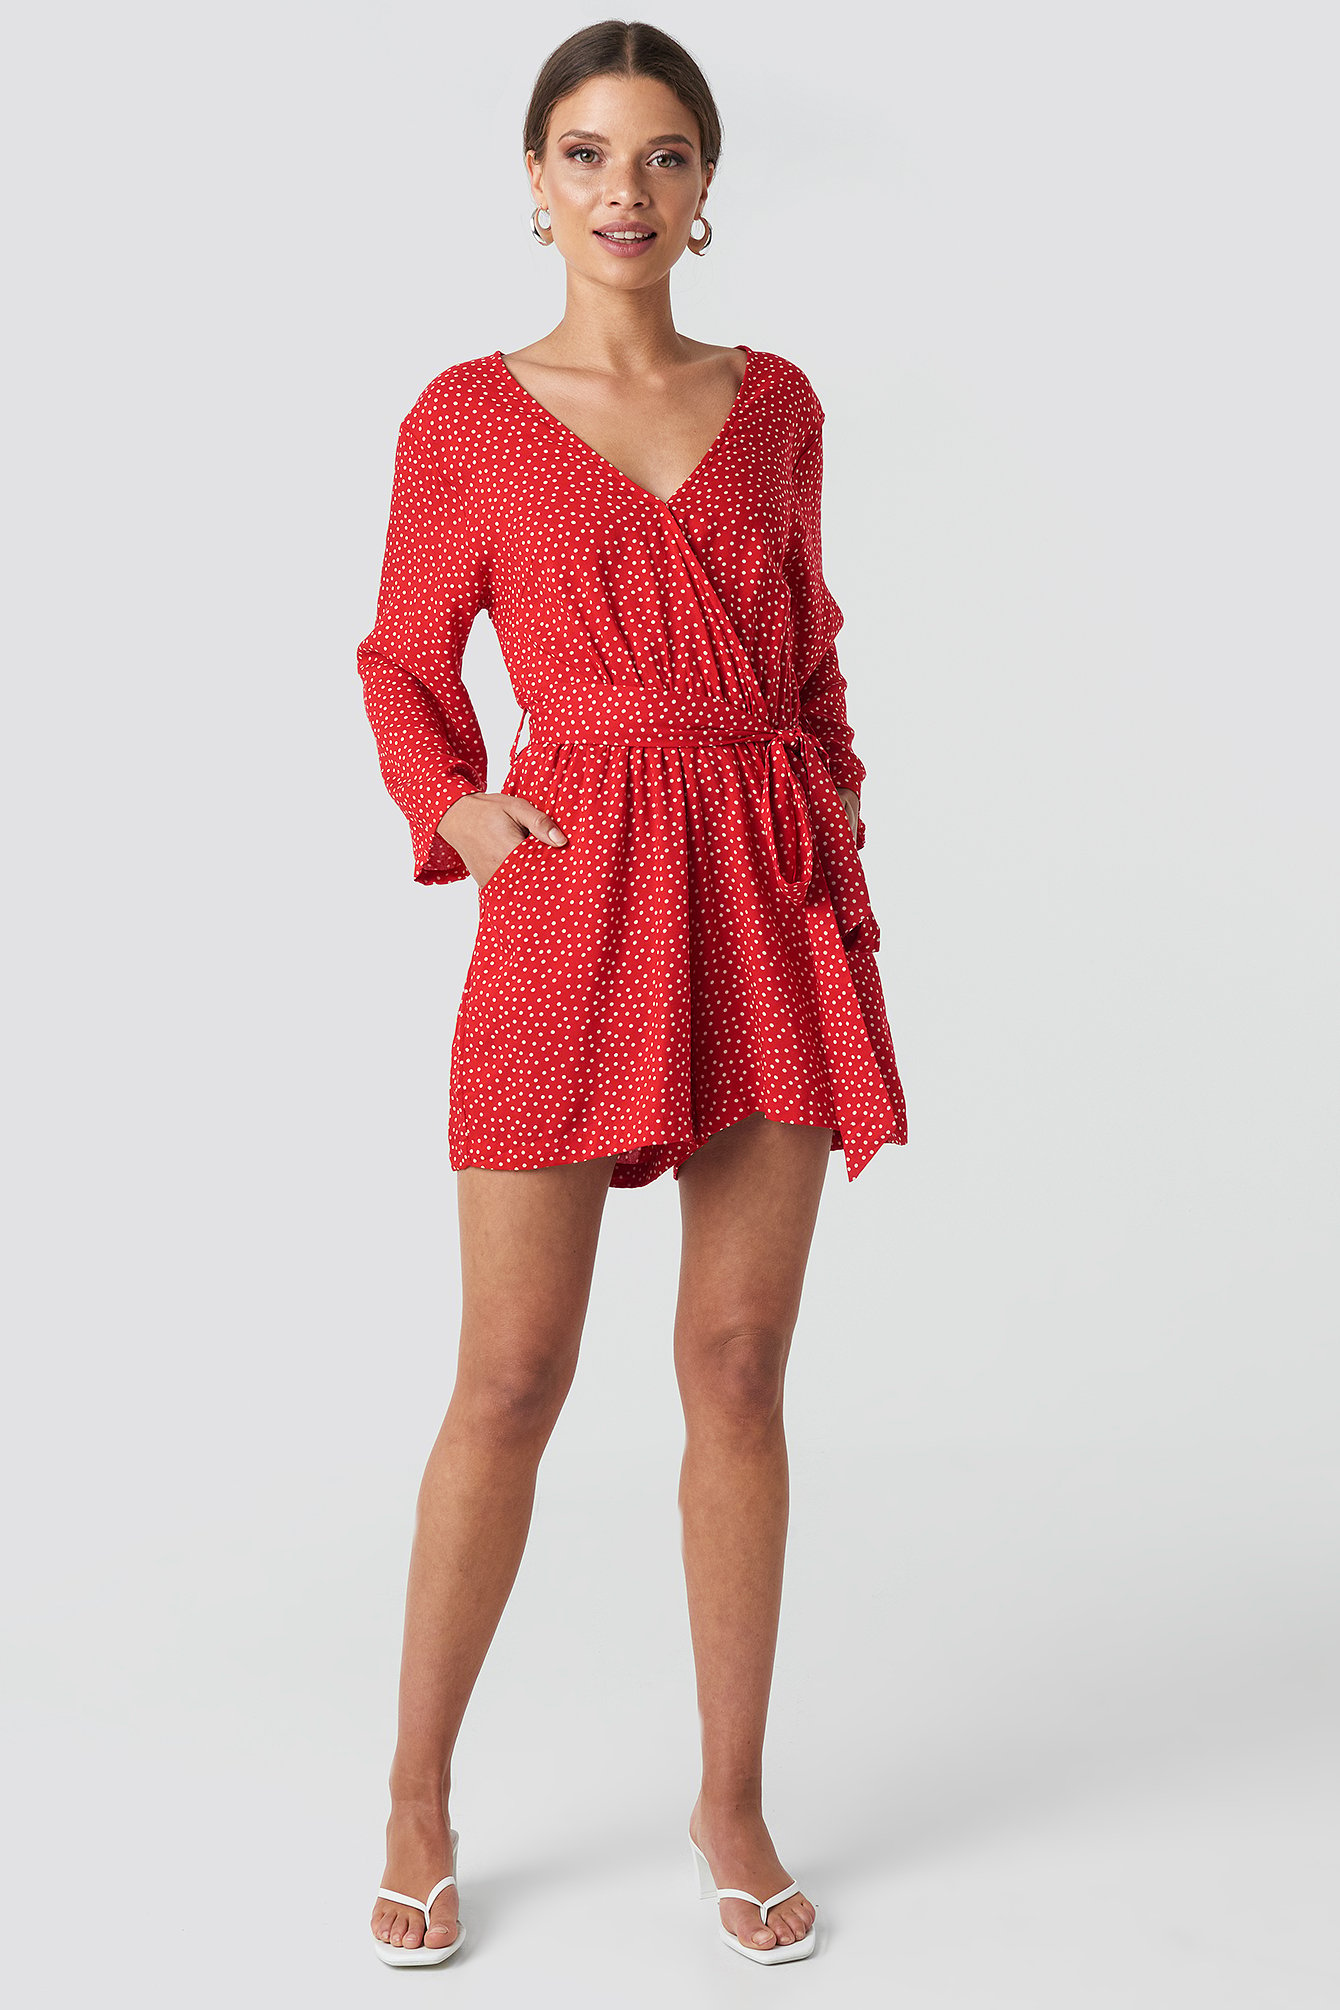 Red/White Dots NA-KD Wrap Playsuit